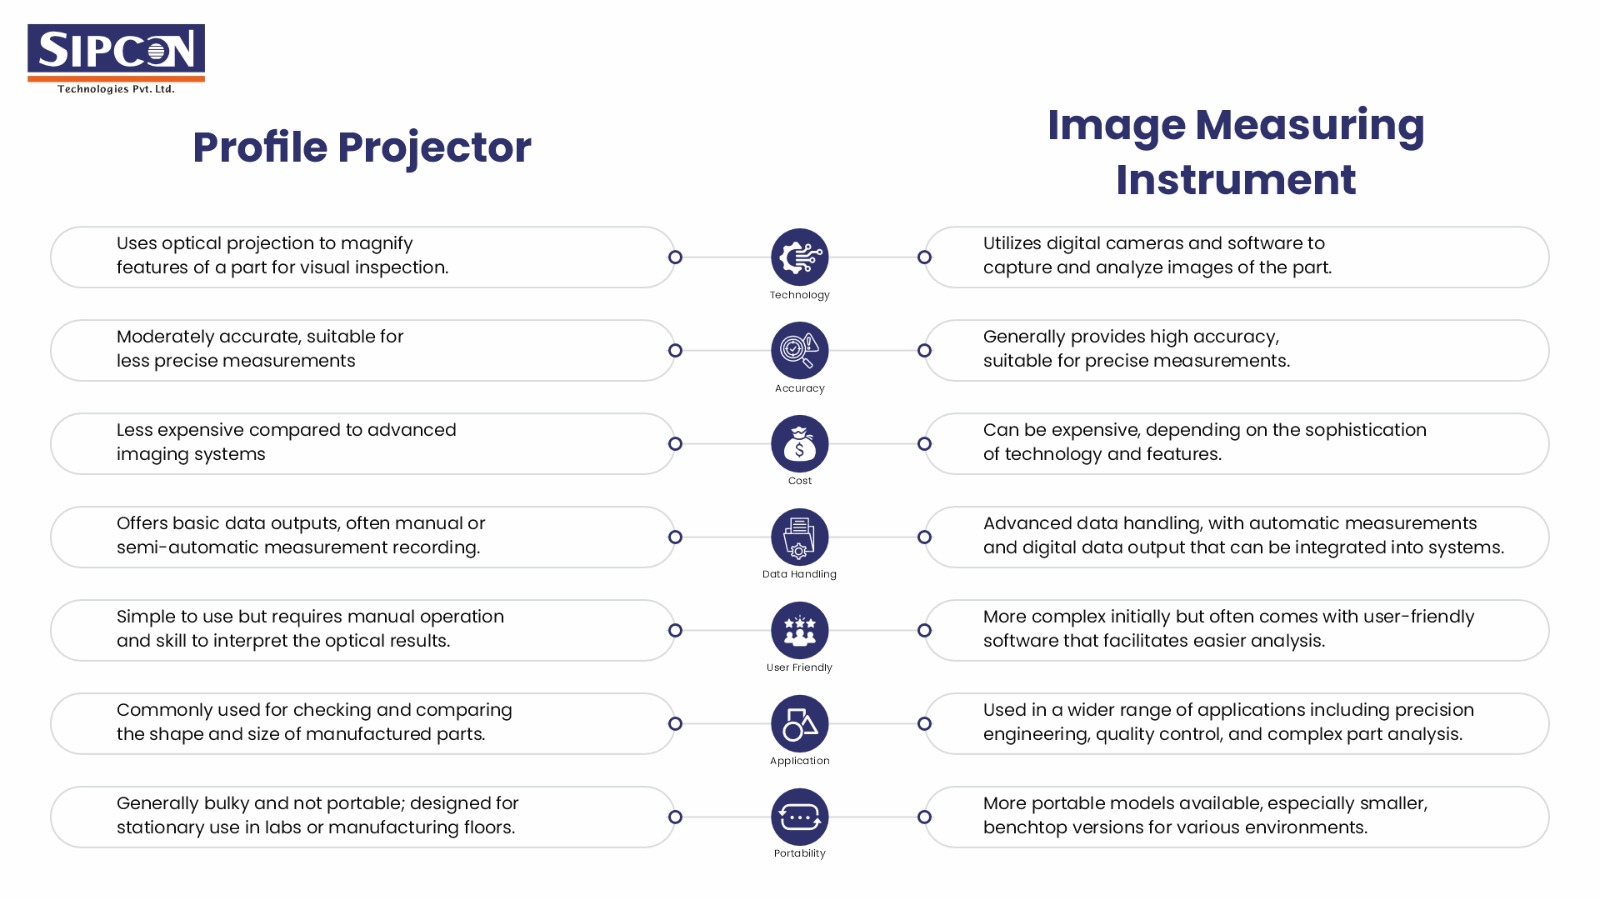 How profile projector is different from image measuring instrument